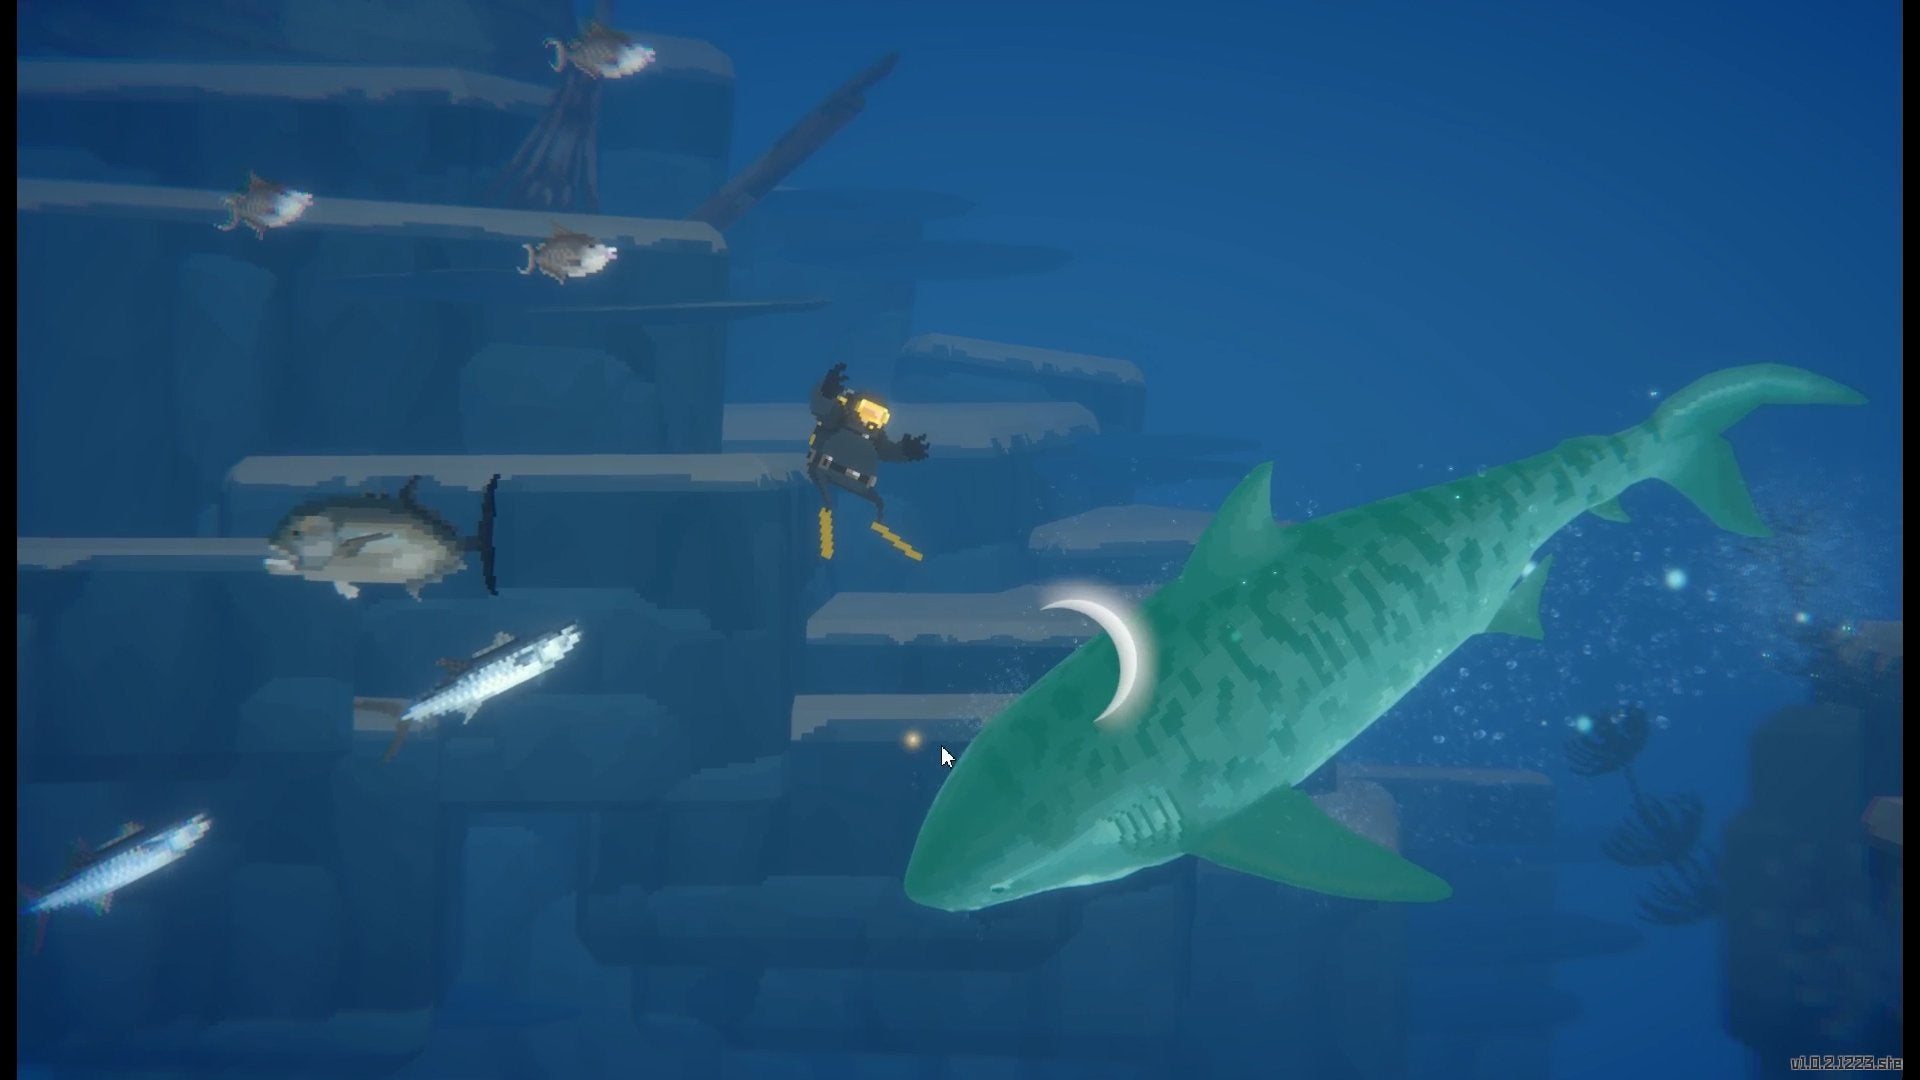 The player dodging an attack from a Tiger Shark in Dave the Diver.